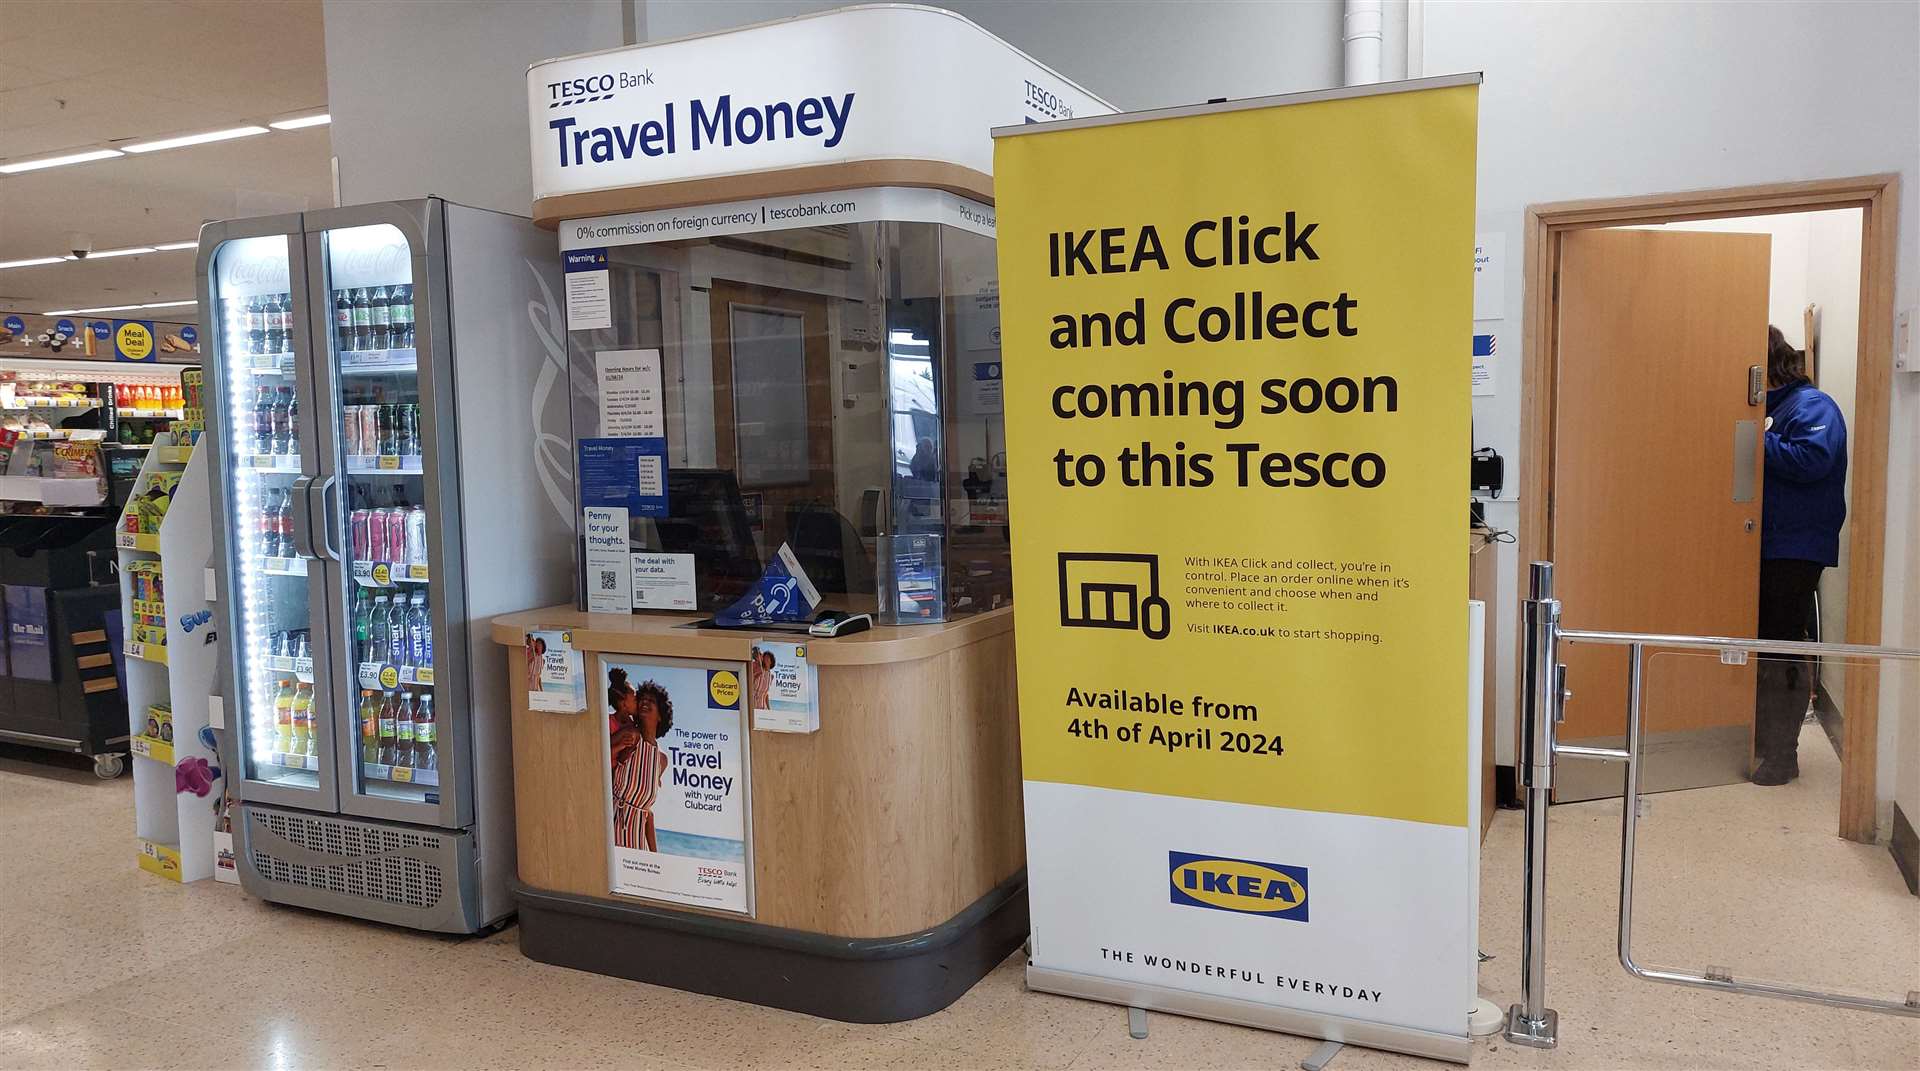 Ashford's Park Farm Tesco is now an IKEA click and collect point